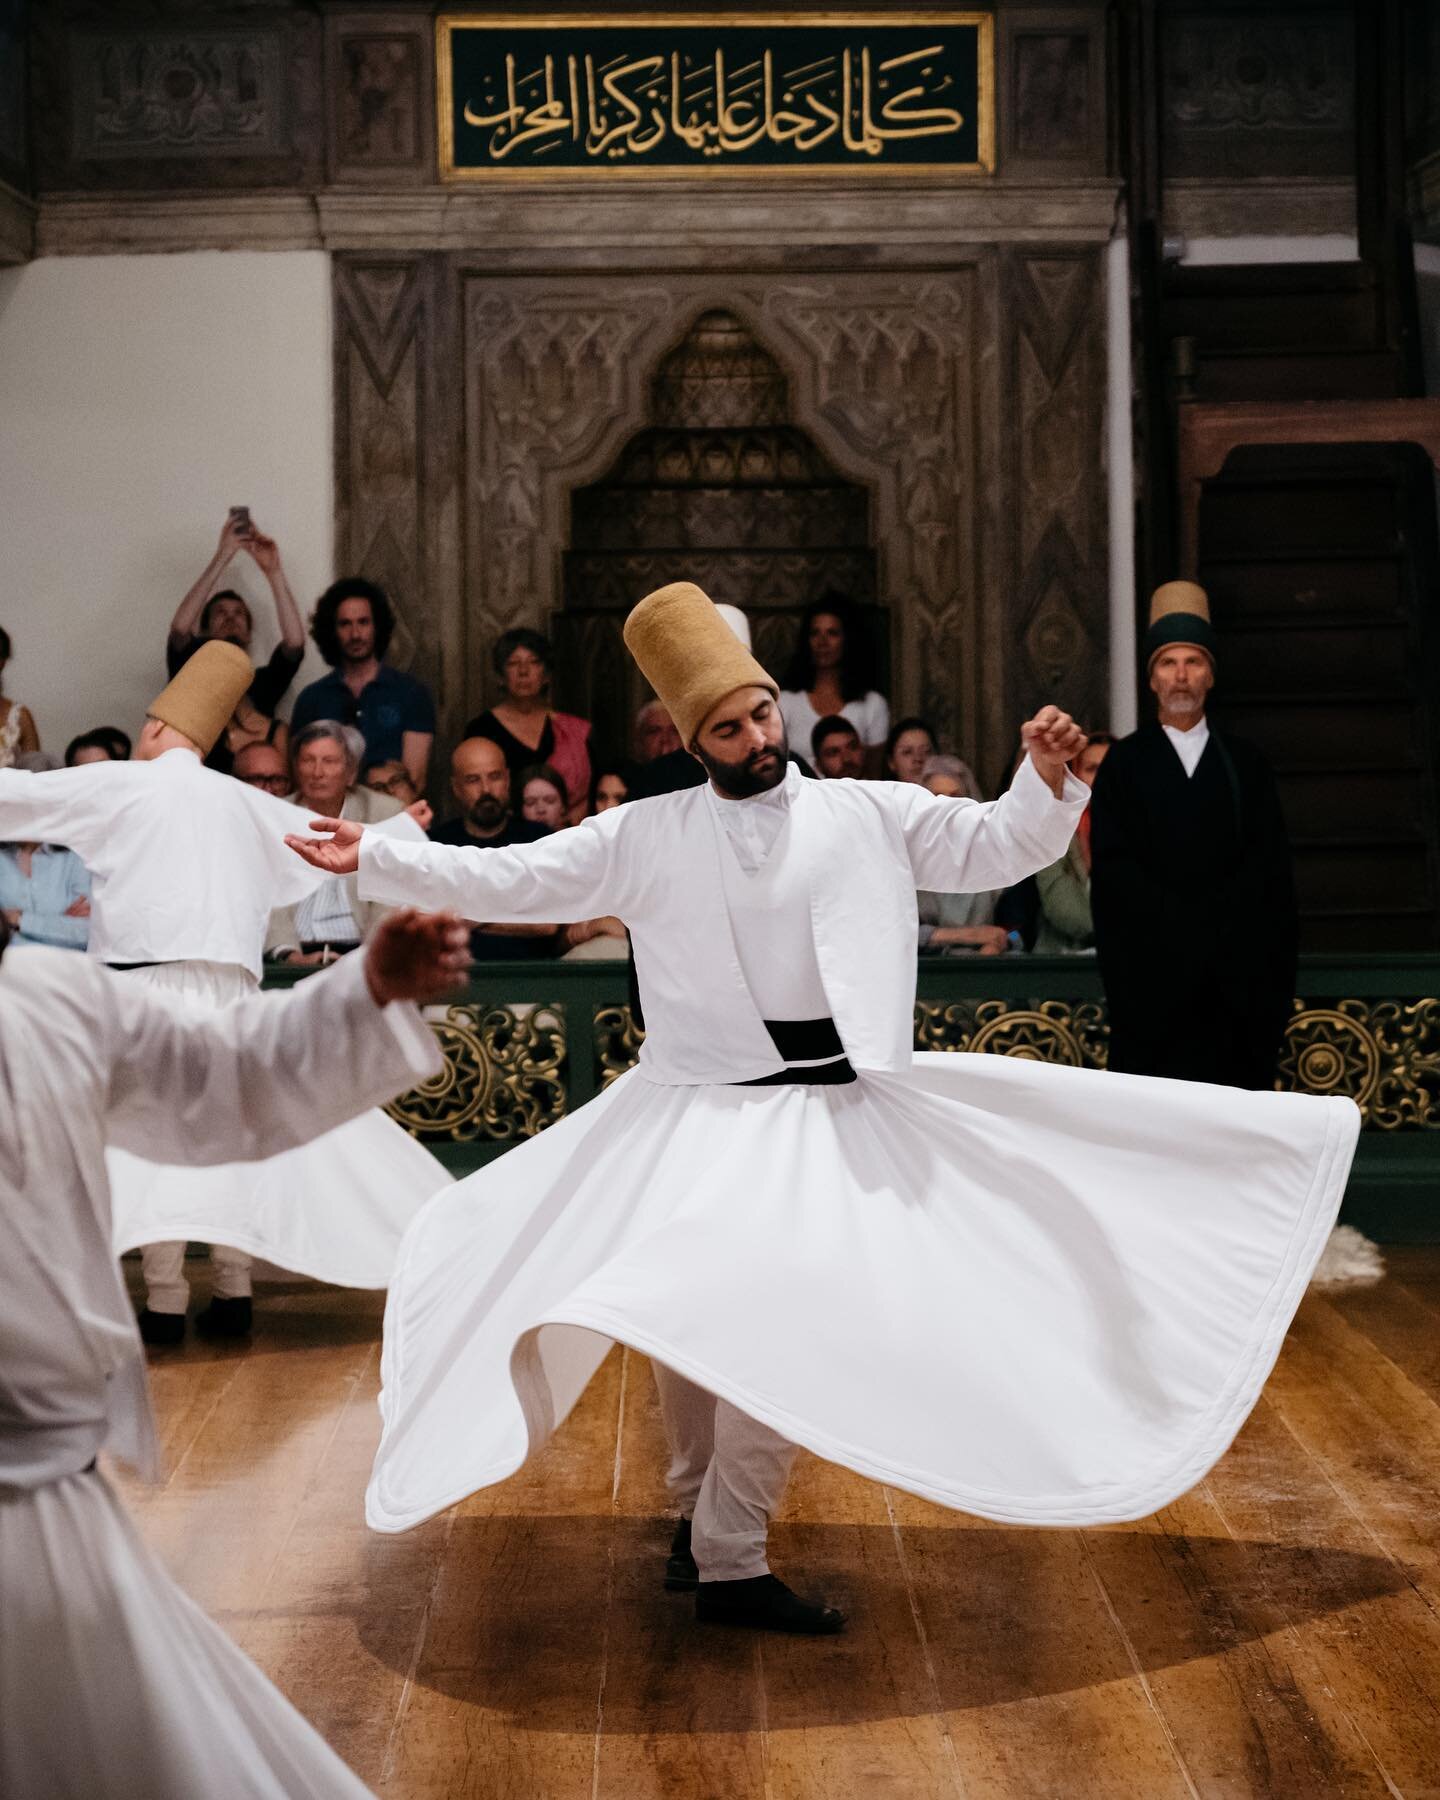 Dervishes whirl at the Galata Mevlevi House in Istanbul; one of Turkey&rsquo;s few remaining dervish lodges.

The 13th century Persian poet, Islamic theologian and Sufi mystic Mevlana Jalaluddin Rumi introduced to his followers the practice of whirli